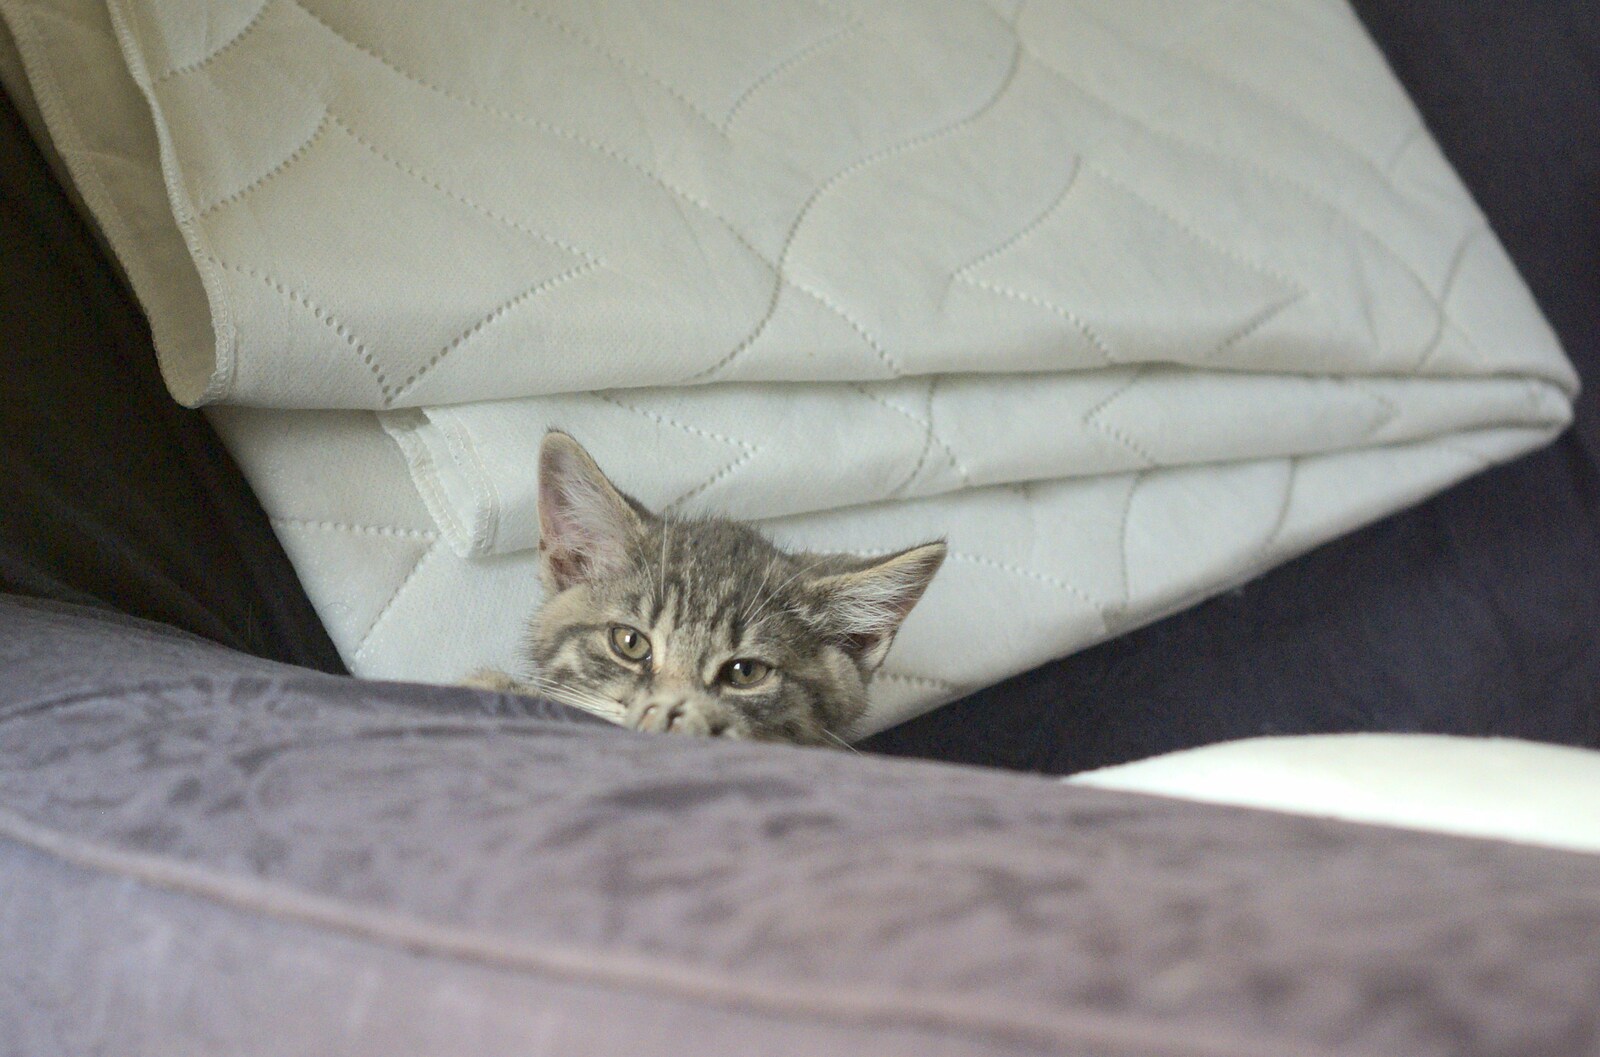 Boris peers over the arm of the sofa from New Kittens and Moonlit Fields, Brome, Suffolk - 11th August 2009